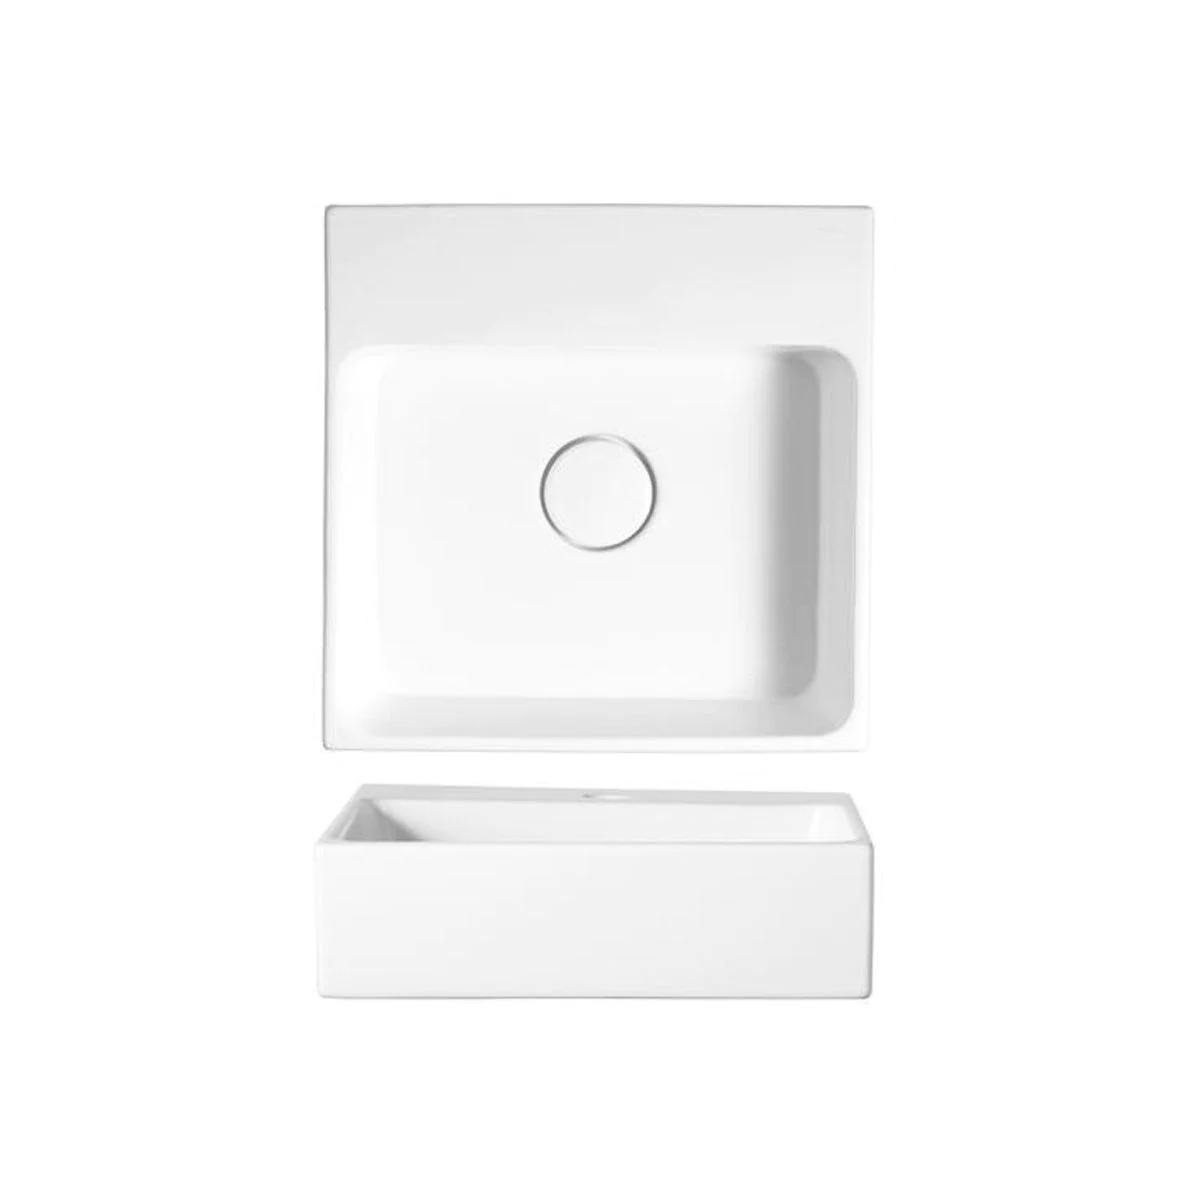 VEROTTI LAVENDER ABOVE COUNTER/WALL MOUNTED FIRECLAY BASIN GLOSS WHITE 400MM